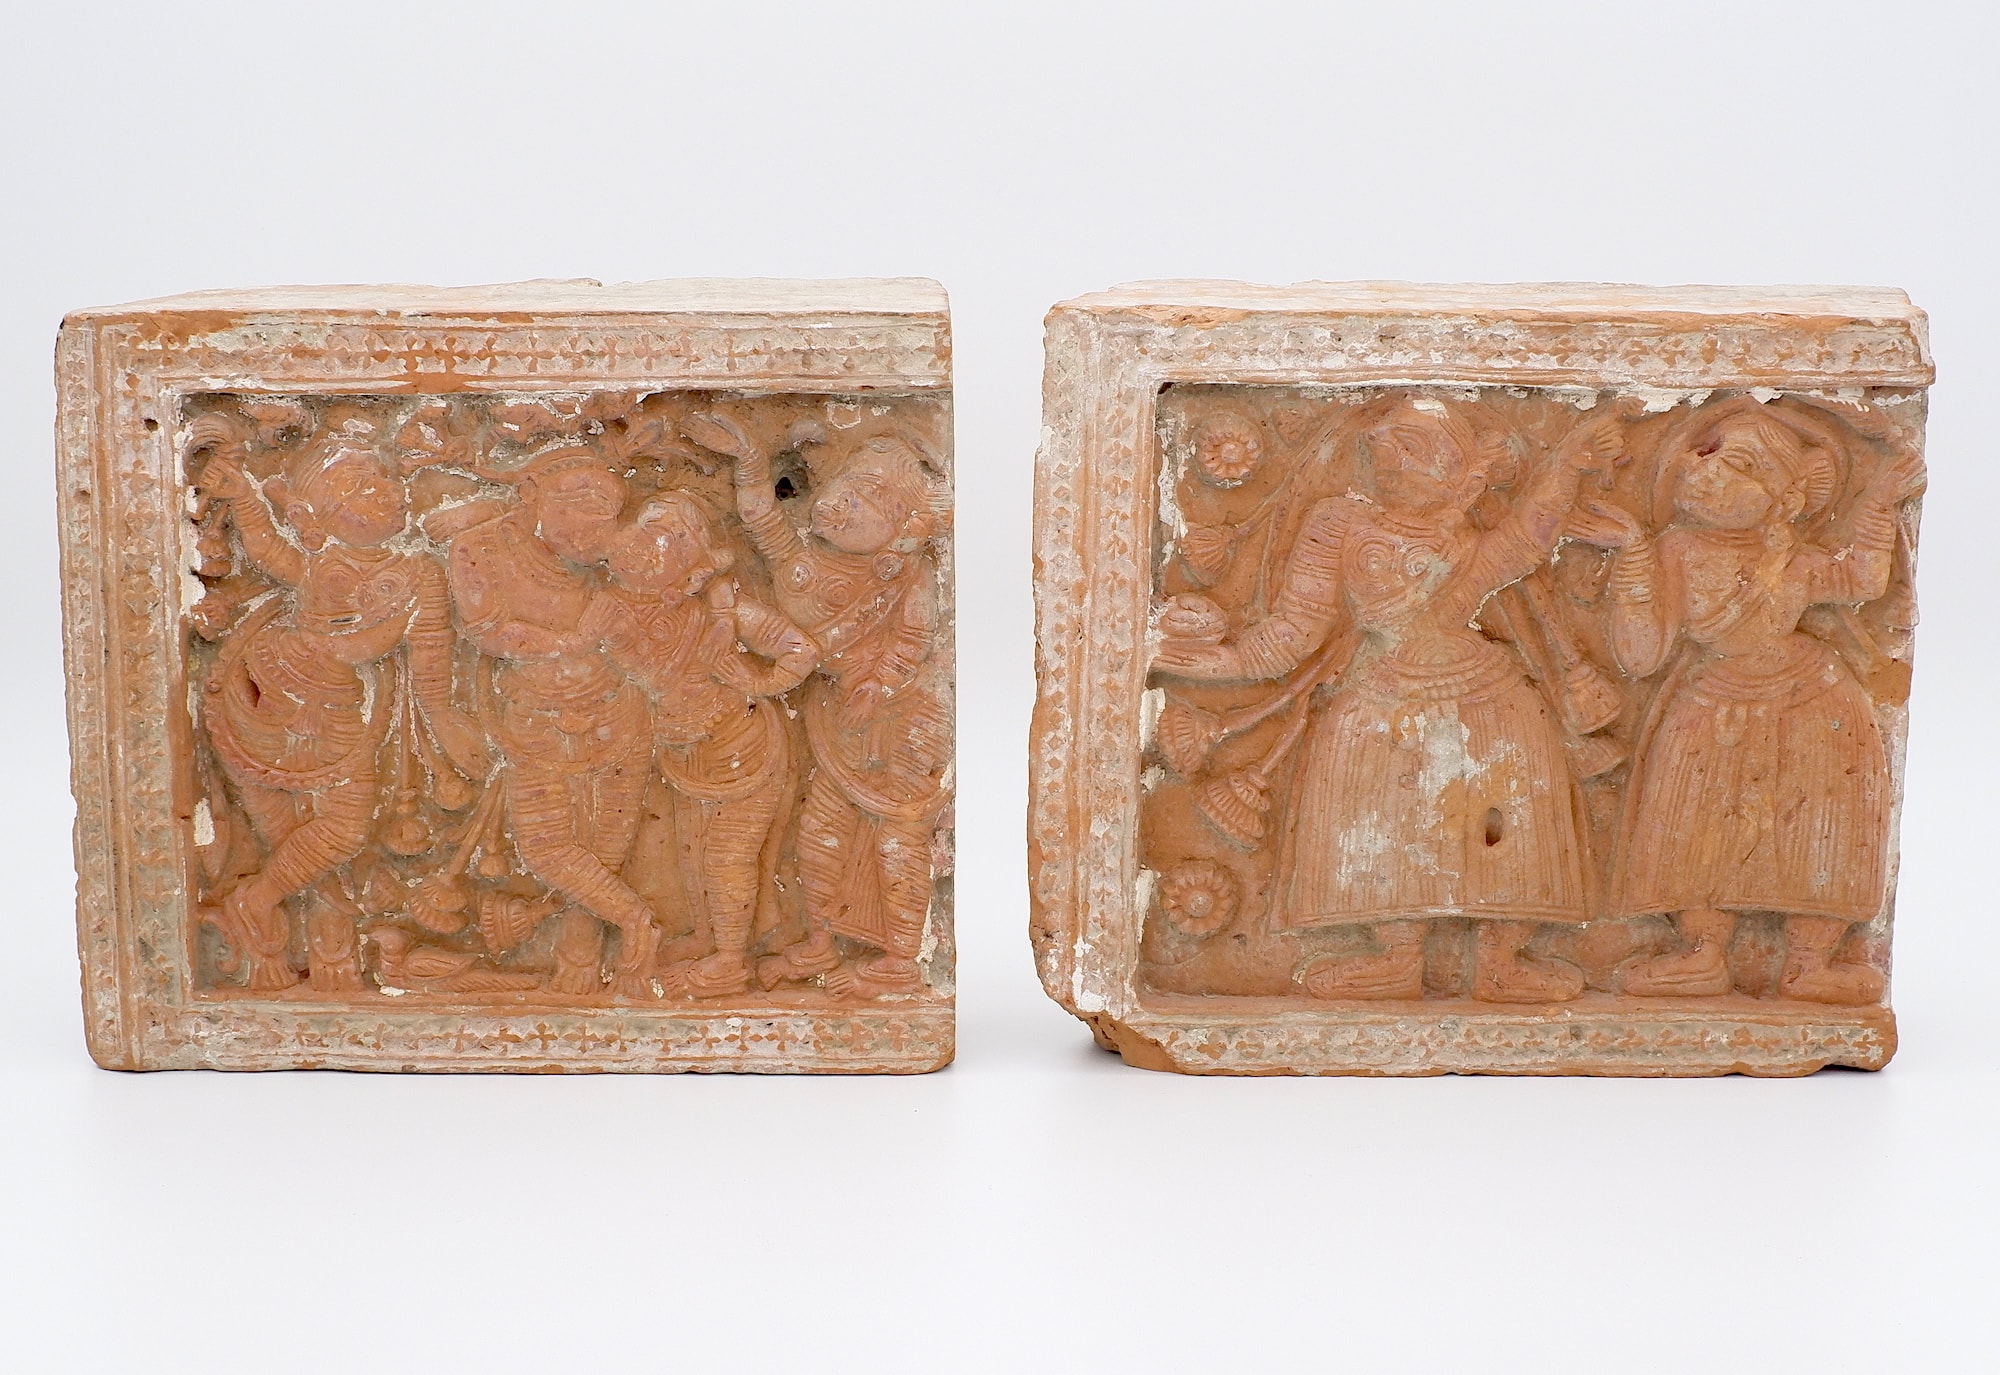 'Two Ancient Medieval Carved and Moulded Terracotta Relief Tiles Bengal or Bangladesh'